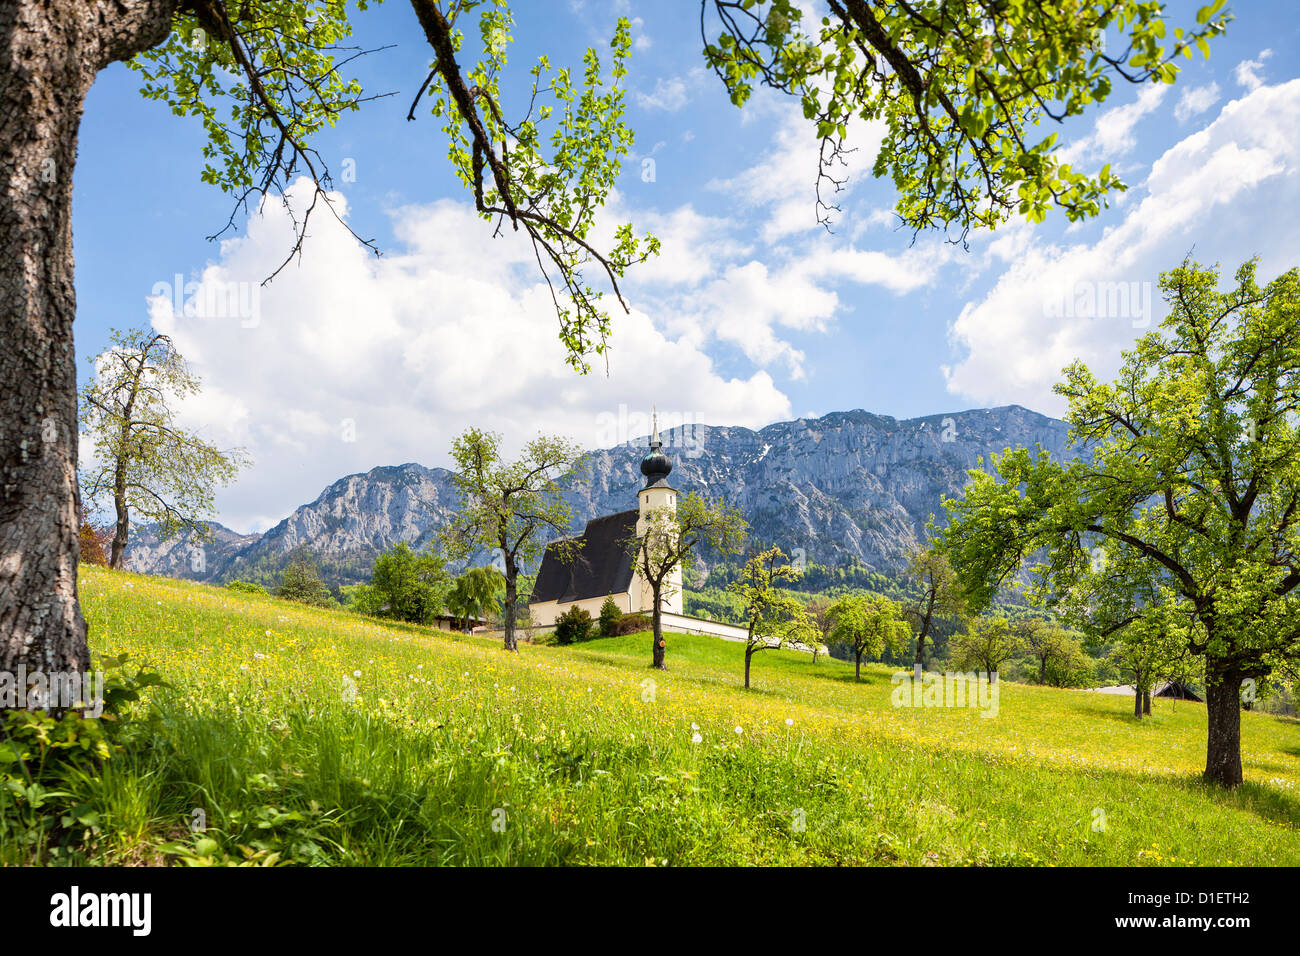 St Andrew's Church in Steinbach am Attersee, Austria Stock Photo